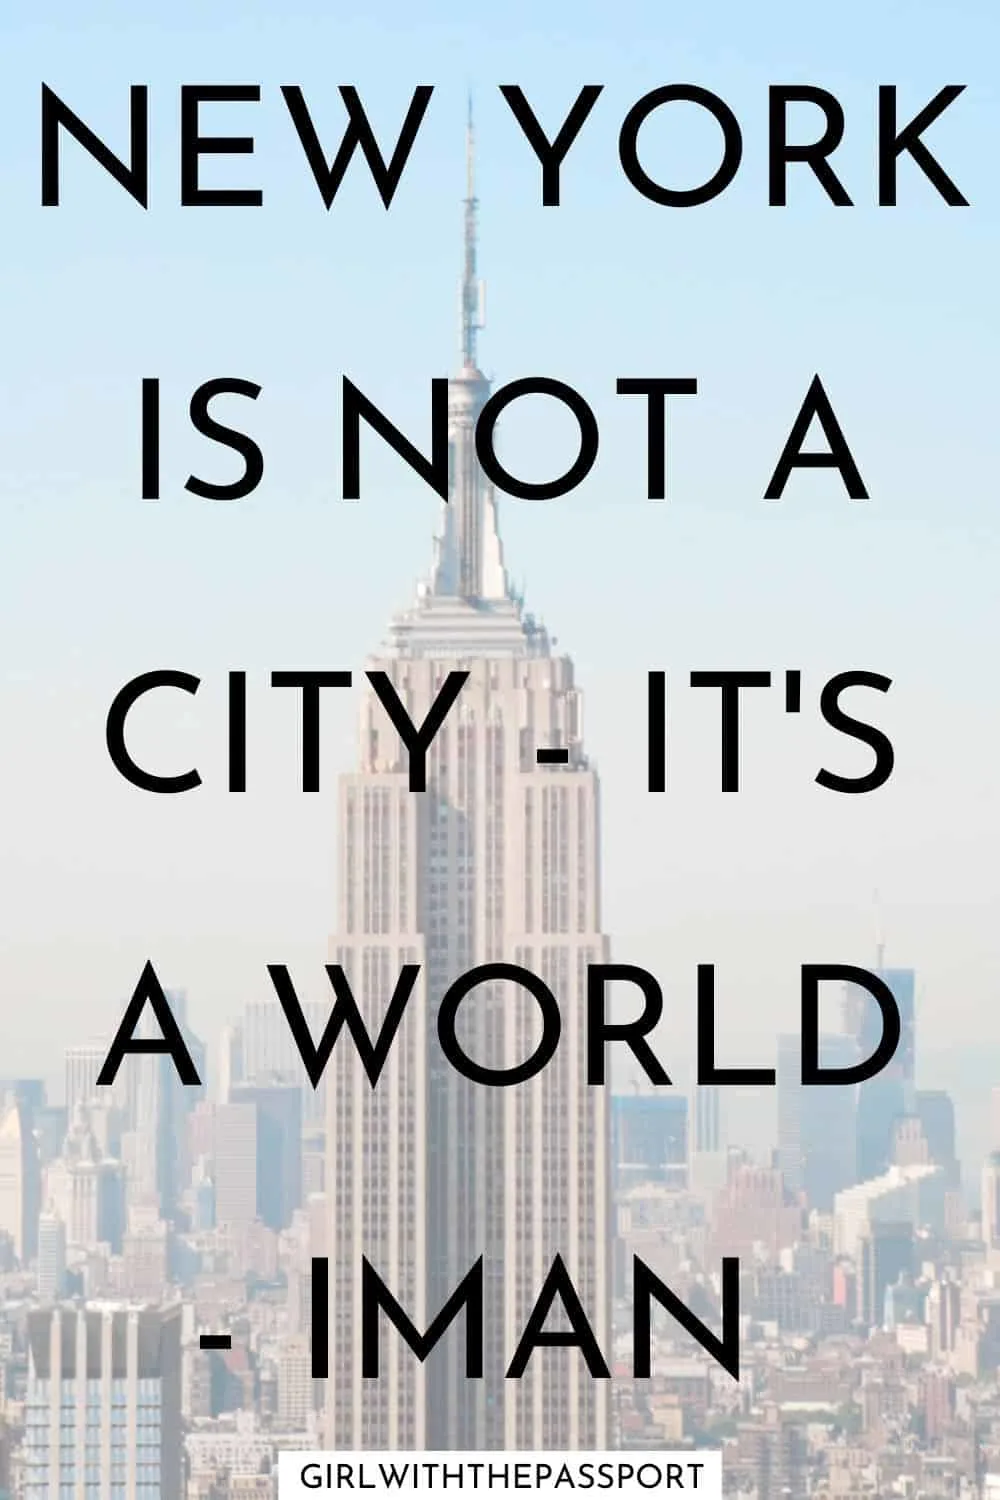 "New York is not a city - it's a world" quote. 